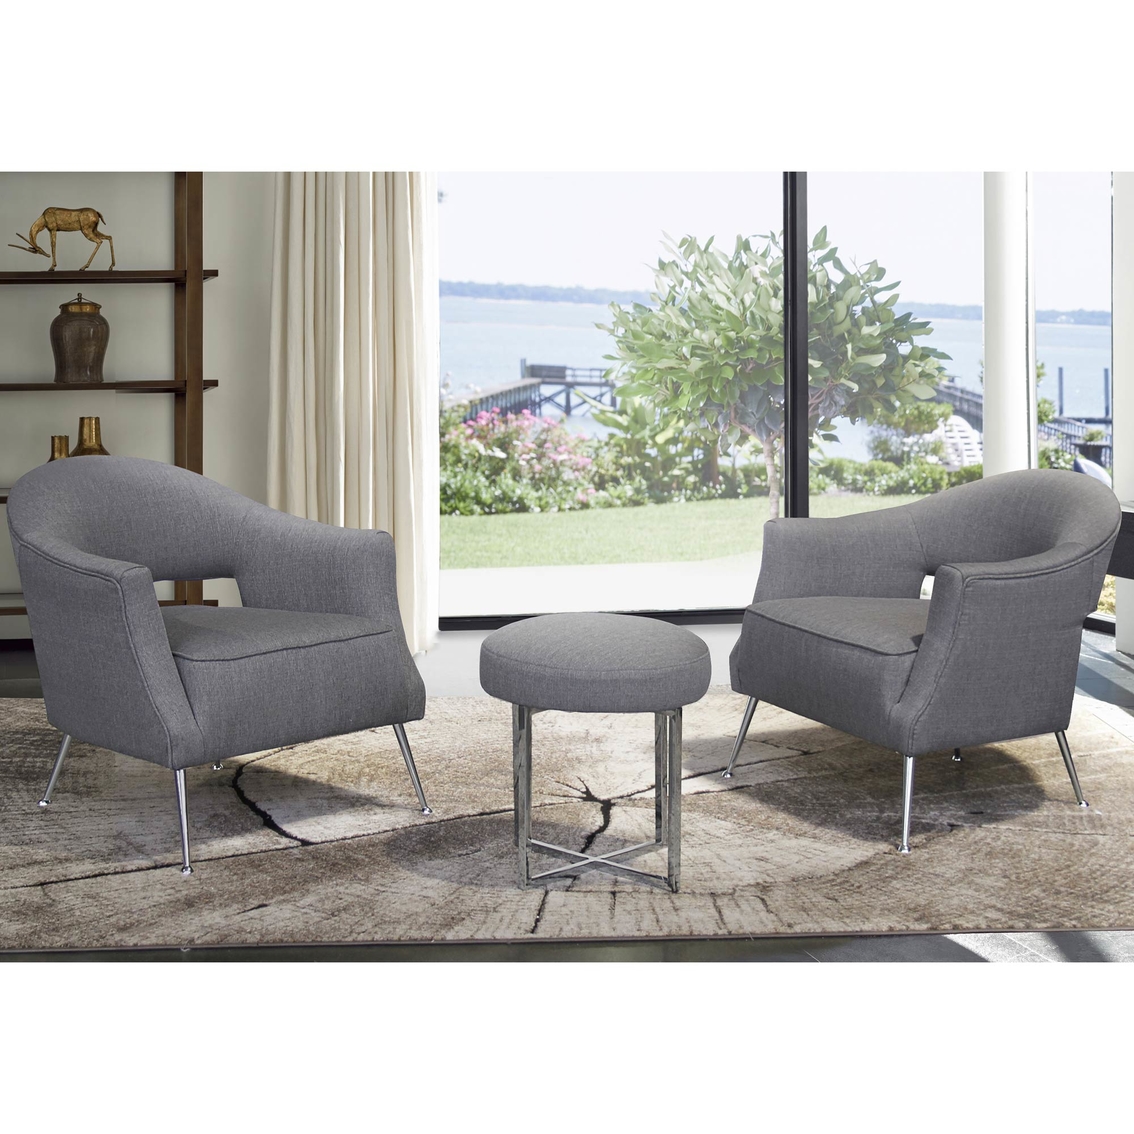 Armen Living Lyric Accent Chair - Image 3 of 3